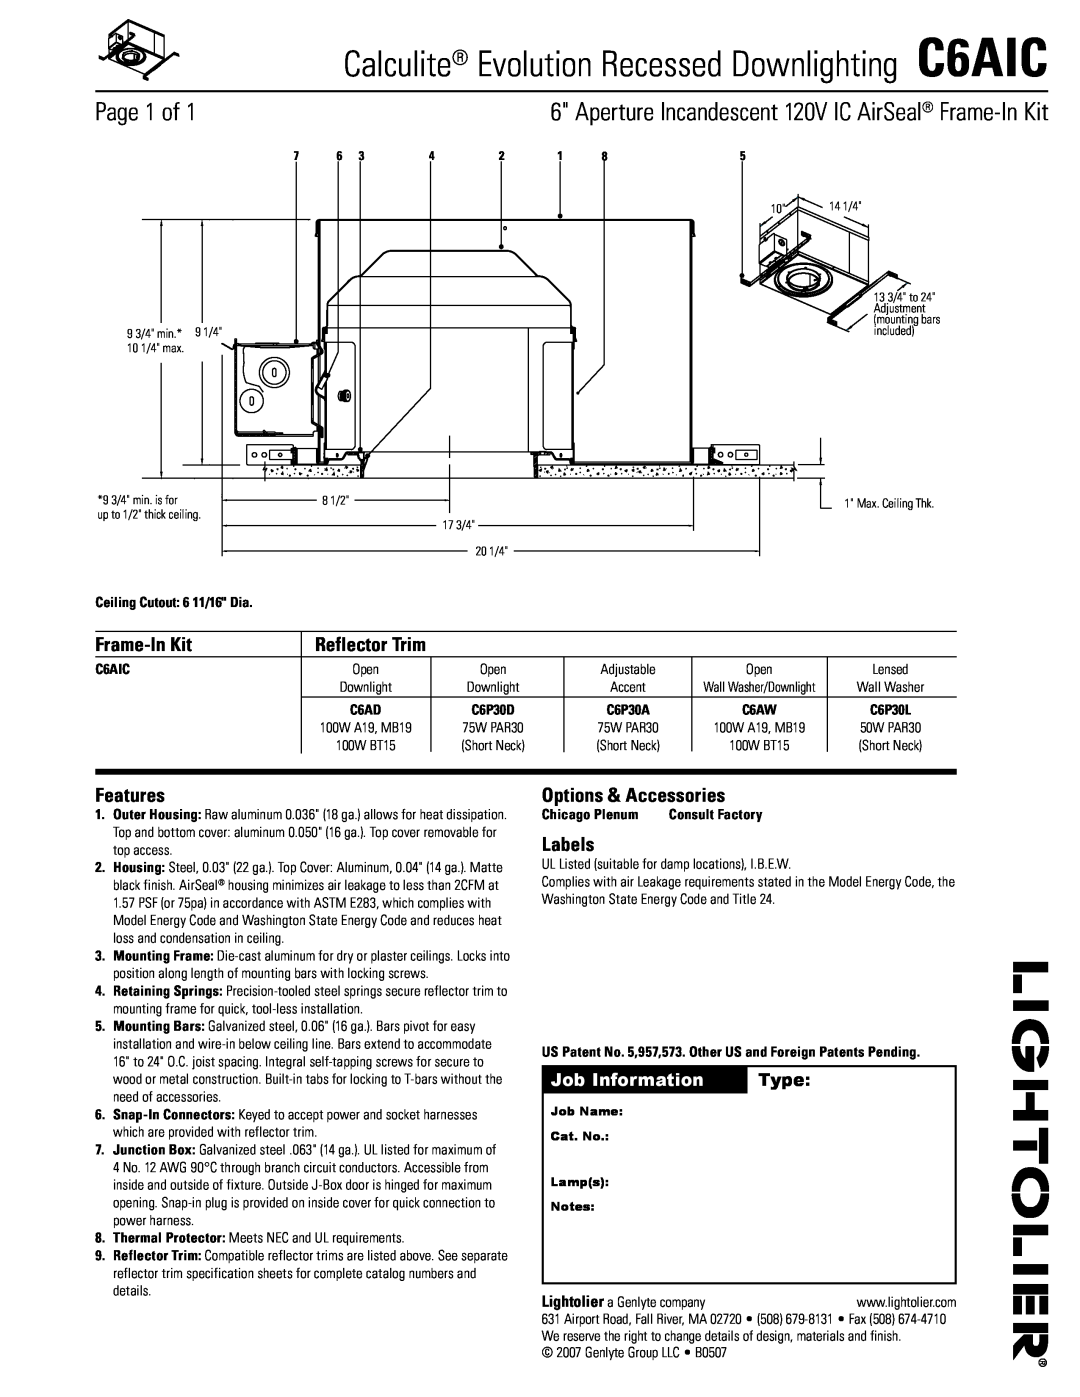 Lightolier specifications Calculite Evolution Recessed Downlighting C6AIC, Page of, Frame-InKit, Features, Labels, Type 